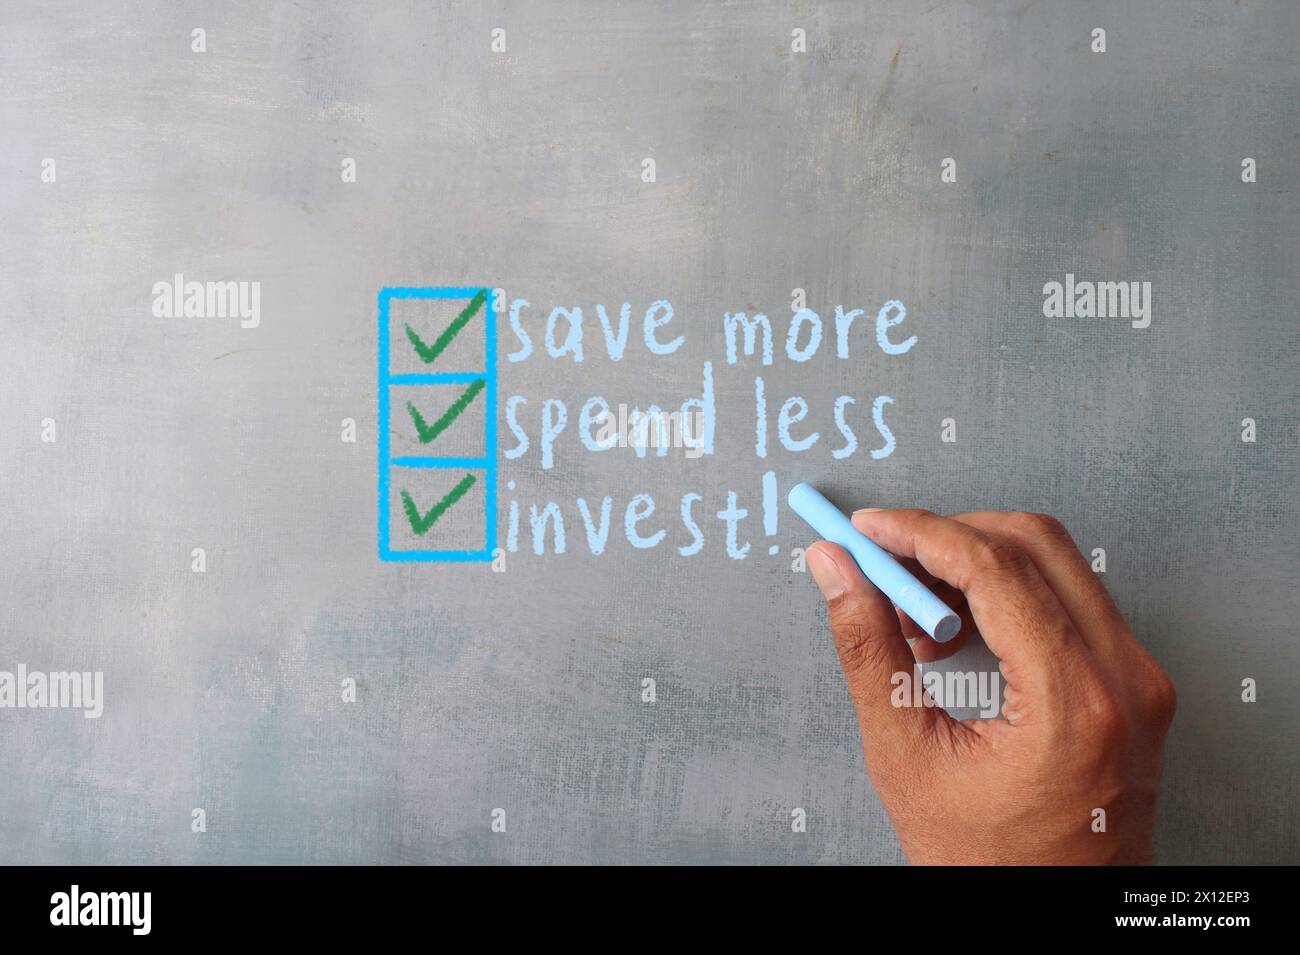 Hand writing on chalkboard text SAVE MORE, SPEND LESS, INVEST. Financial concept. Stock Photo